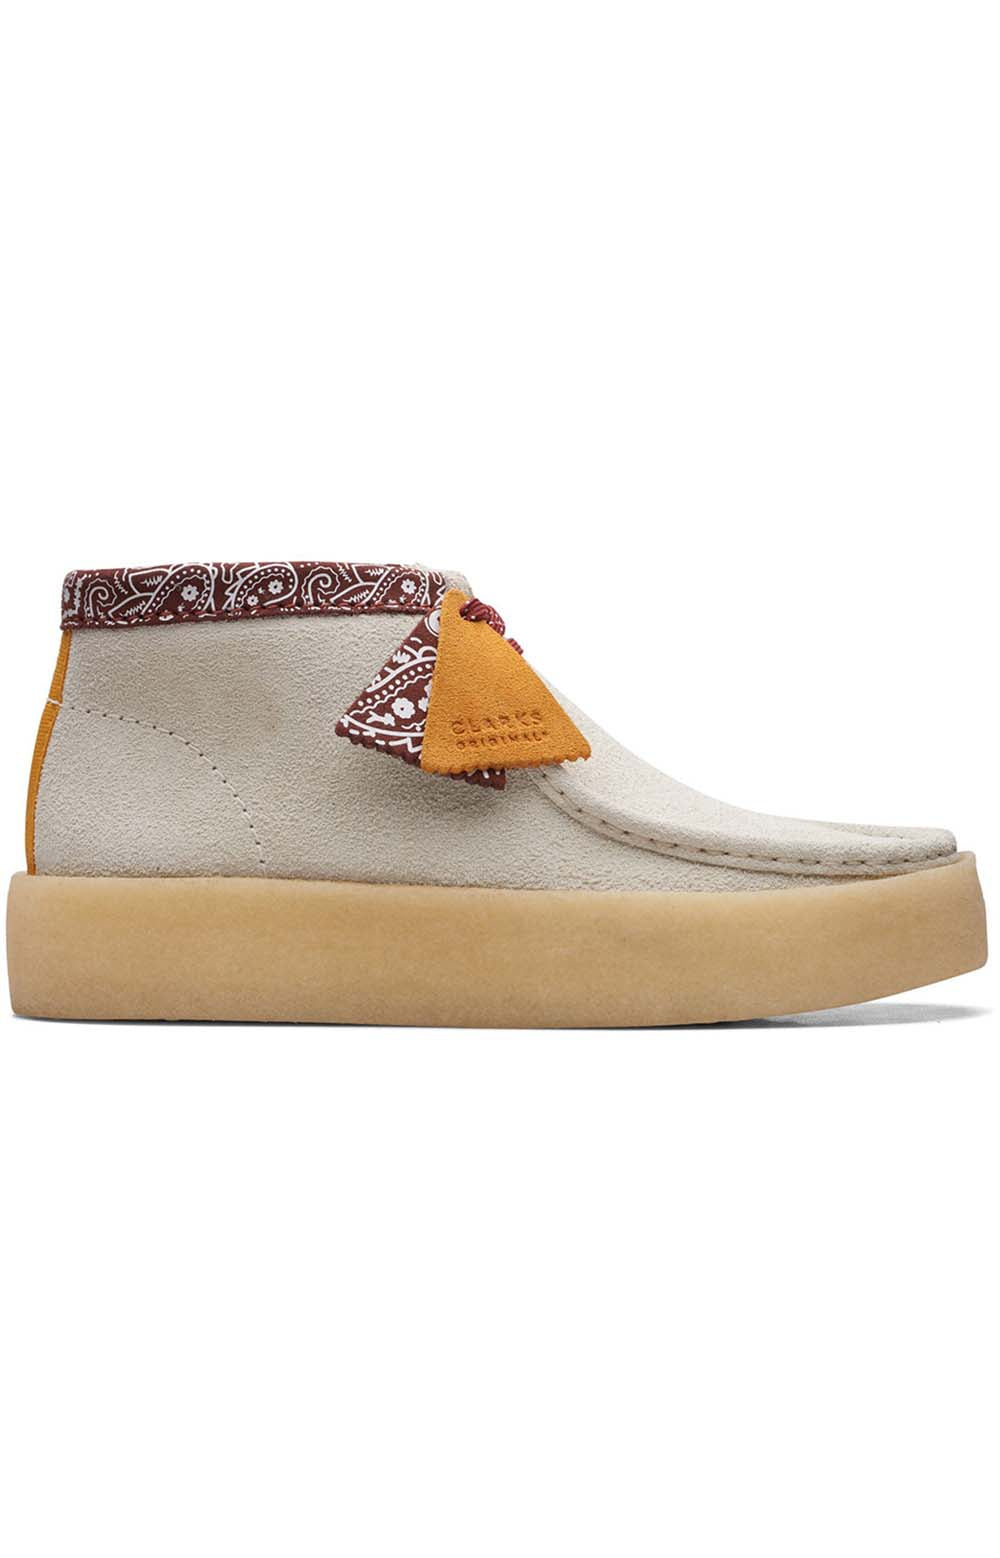 Clarks Originals Wallabee Cup Boots Men's White Interest Suede 26167977 in close-up, showing the intricate stitching and high-quality suede material